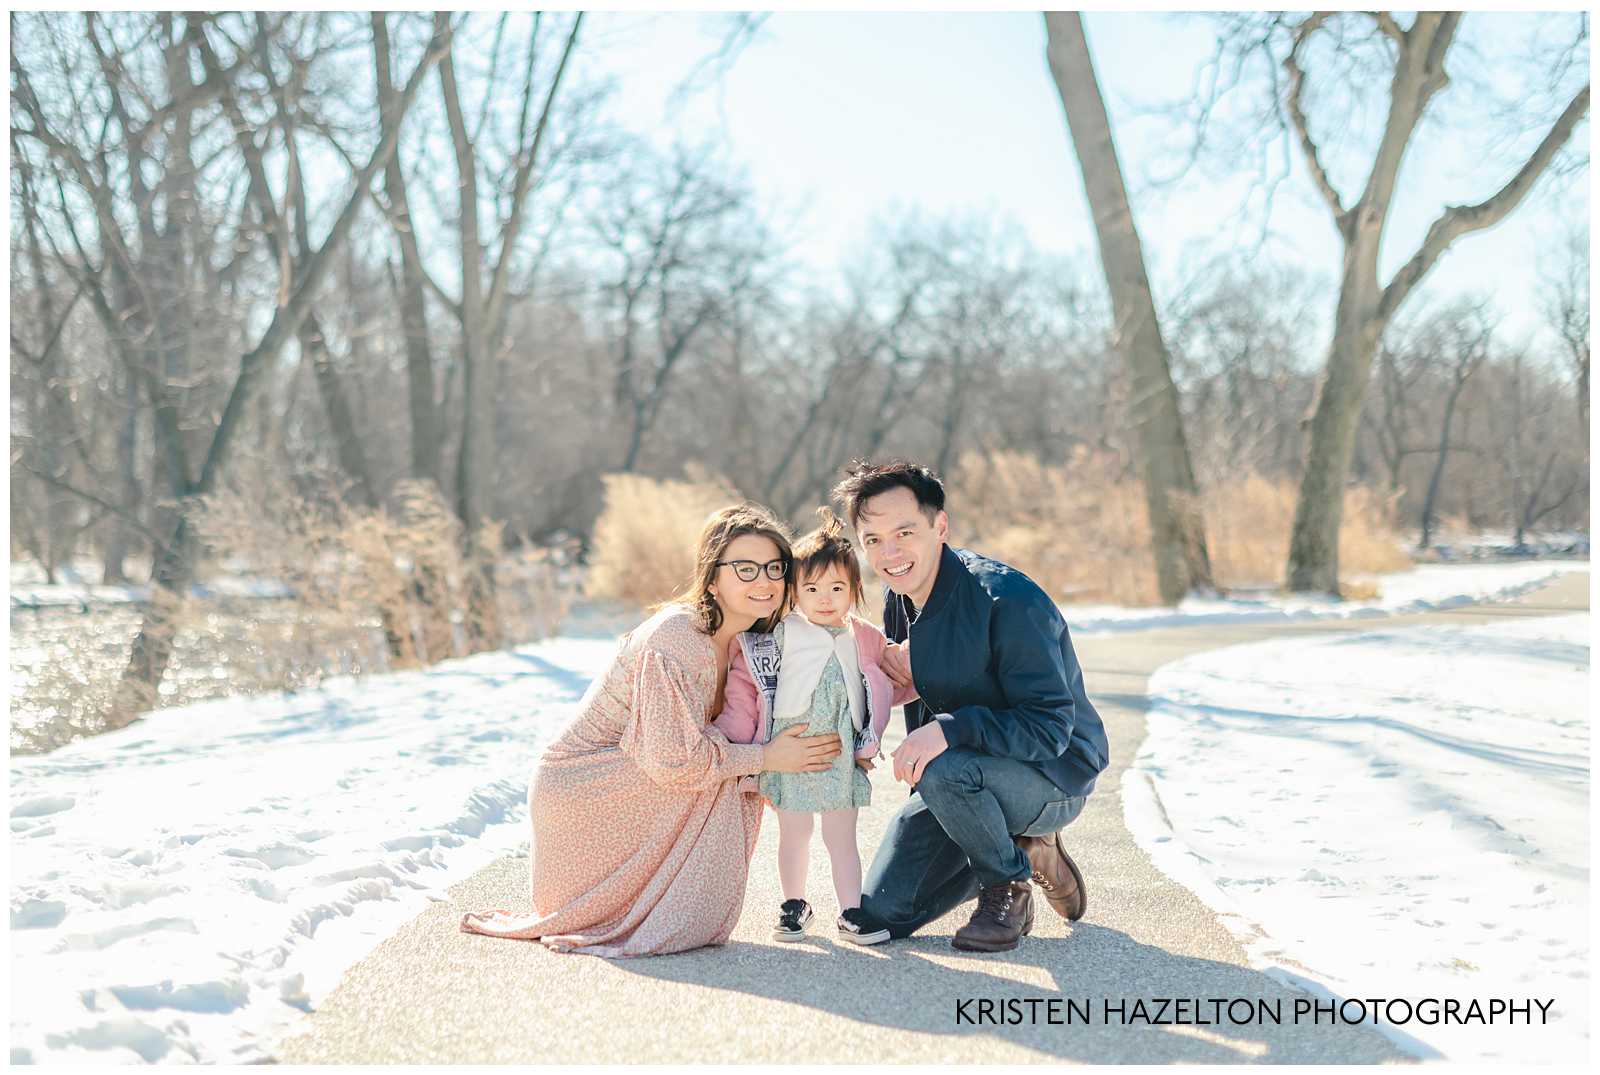 Mom and Dad crouched down next to toddler daughter at a Winter Family Photoshoot